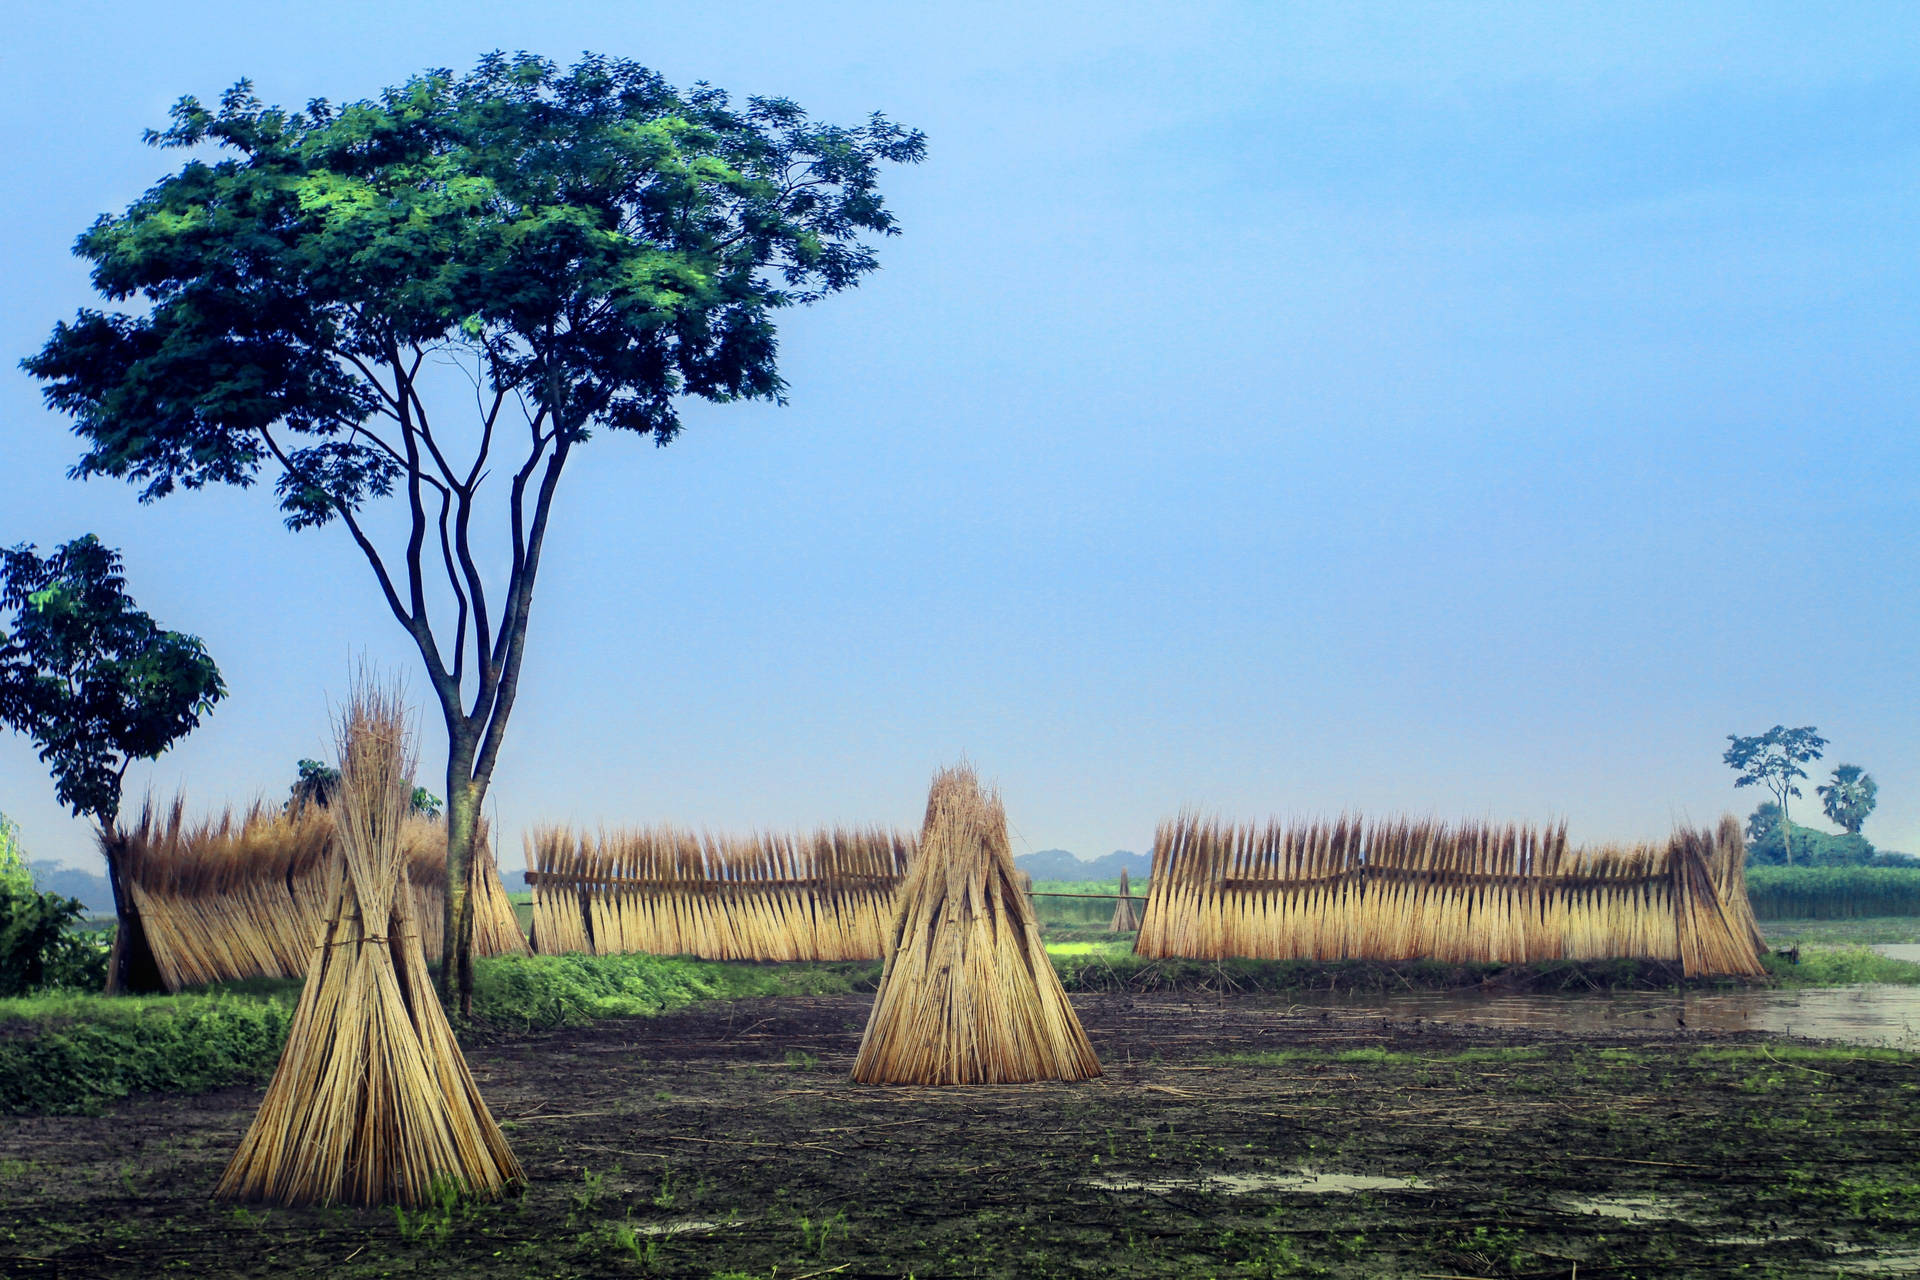 Jute Farming In The Heartland Of Africa